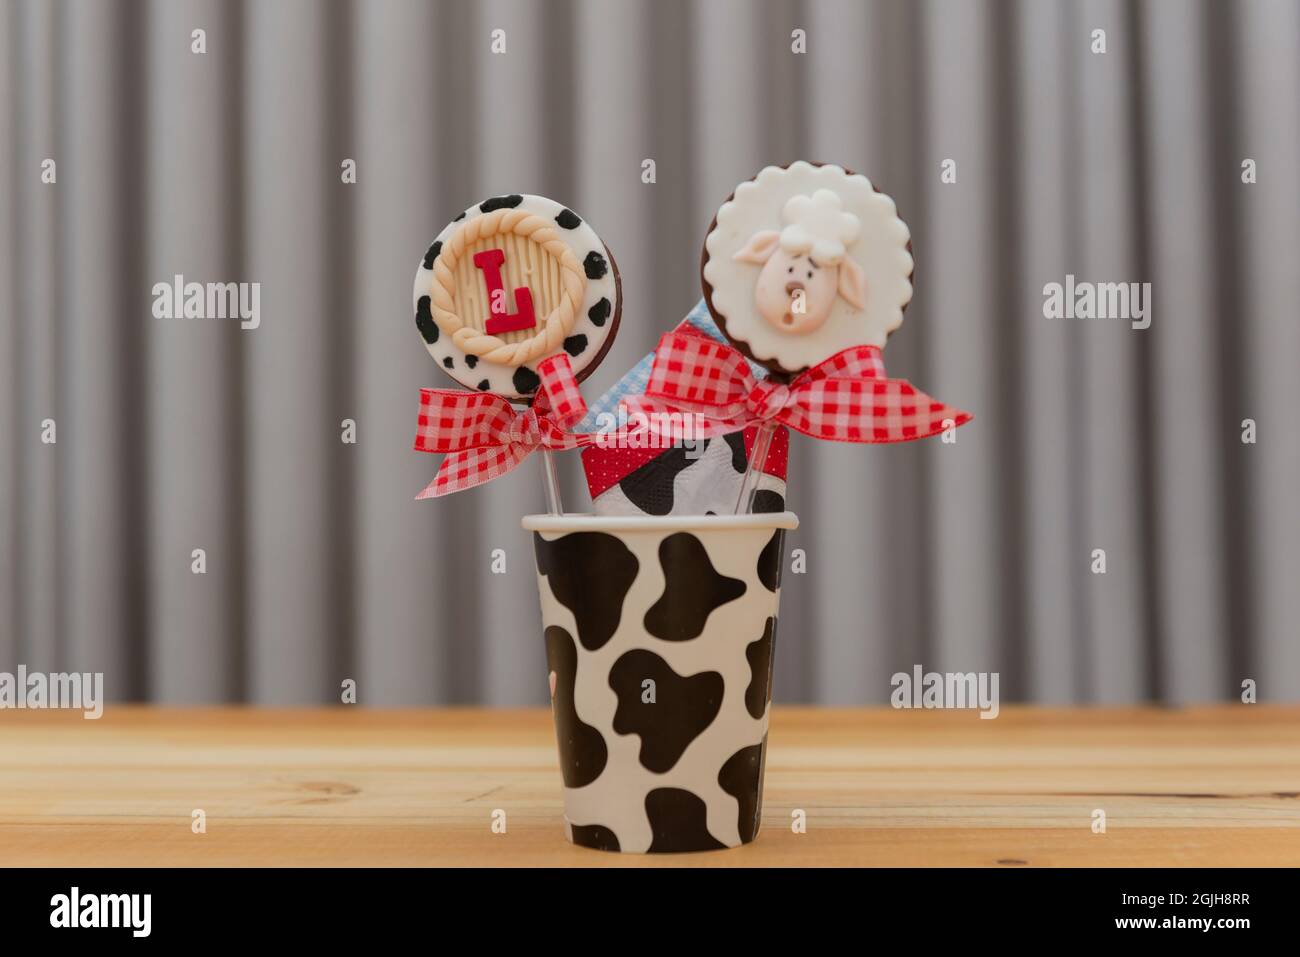 Children's party decoration in country theme. 1 year anniversary. Lollipop with checkered bow. Stock Photo